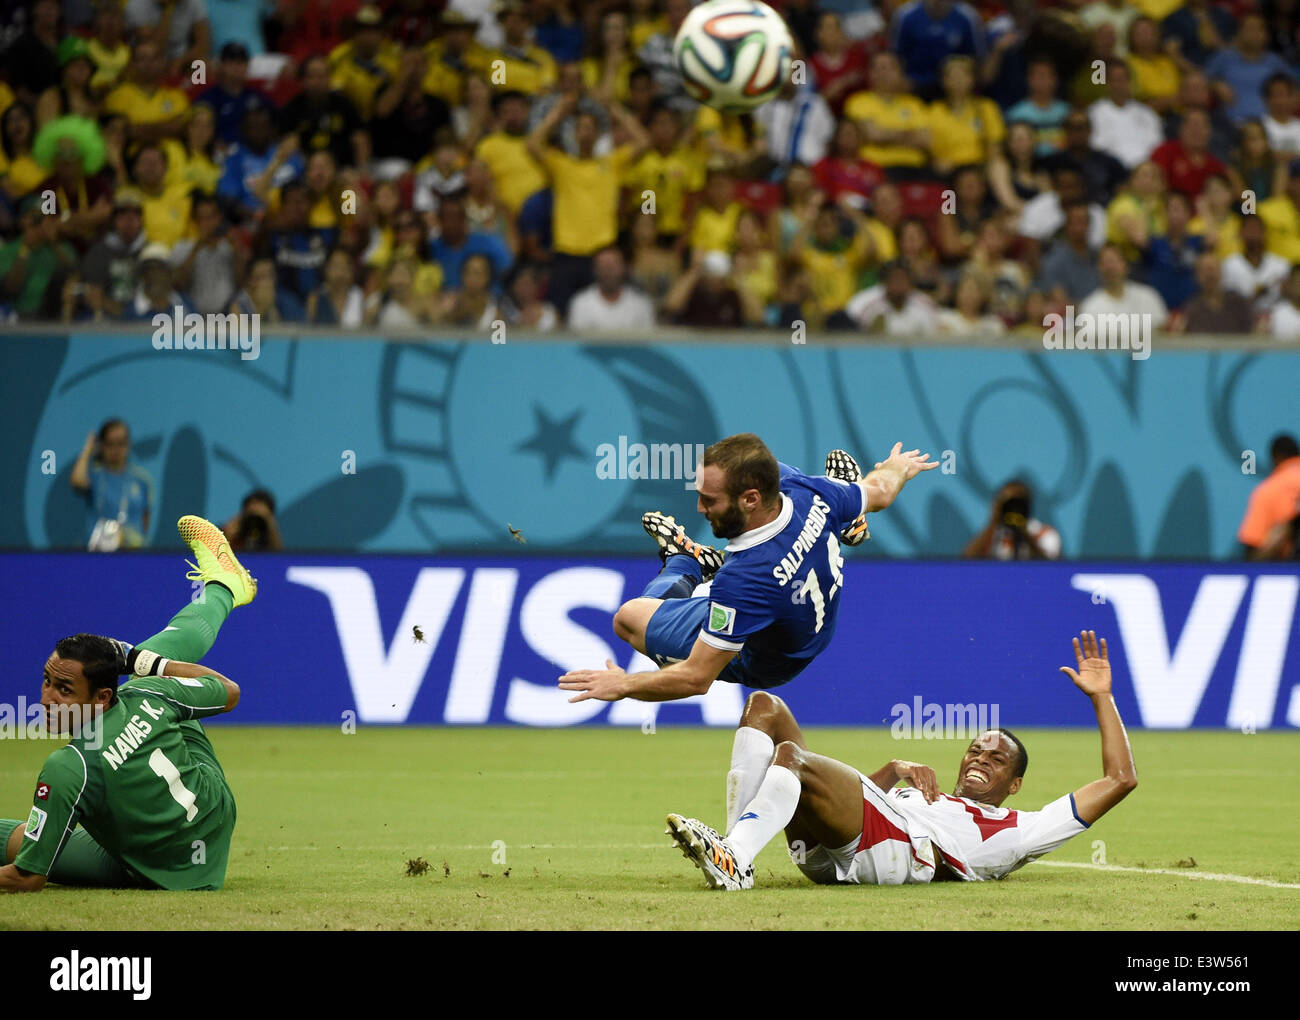 Recife, Brazil. 29th June, 2014. Costa Rica's Celso Borges (R) and goalkeeper Keilor Navas (R) defend against the attack of Greece's Dimitris Salpingidis during a Round of 16 match between Costa Rica and Greece of 2014 FIFA World Cup at the Arena Pernambuco Stadium in Recife, Brazil, on June 29, 2014. Credit:  Lui Siu Wai/Xinhua/Alamy Live News Stock Photo